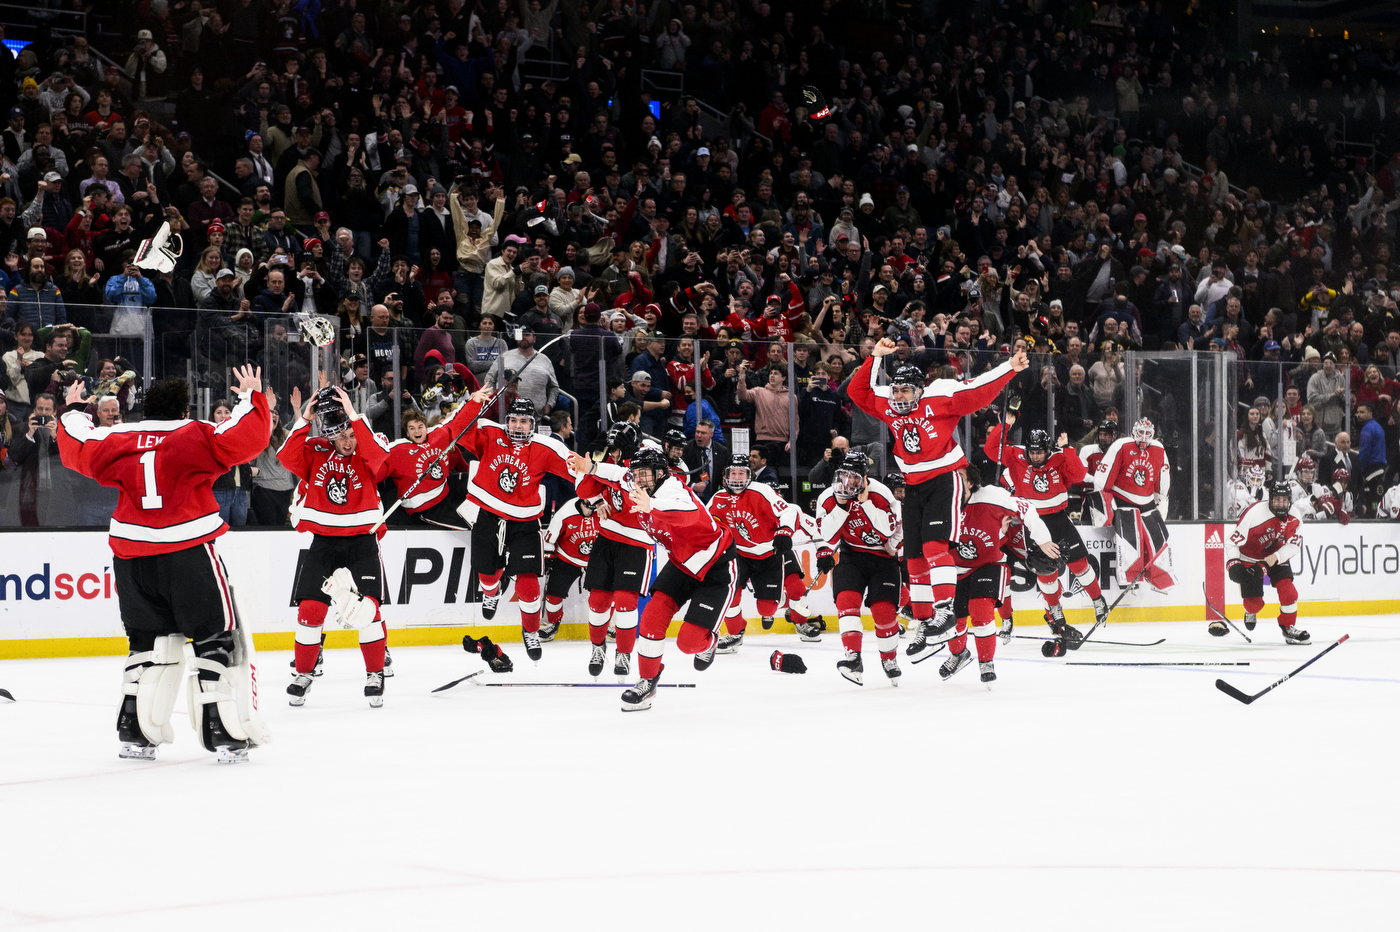 northeastern hockey players celebrate on the ice at td garden